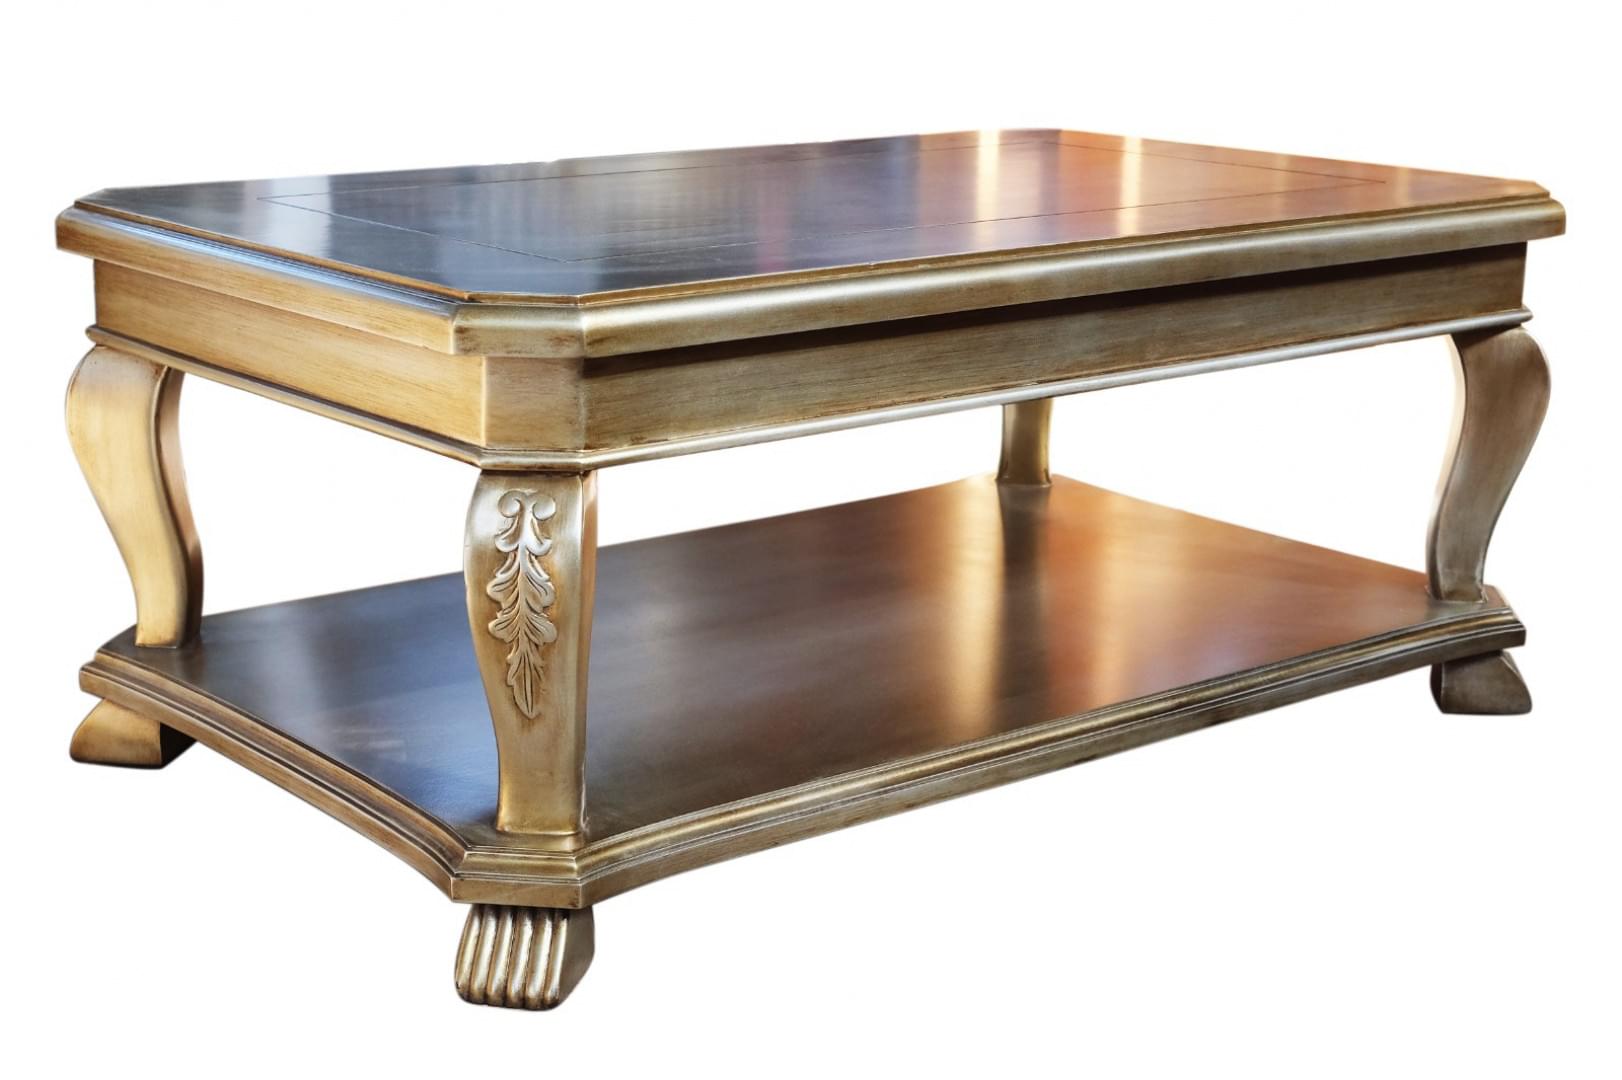 ARAVIND COFFEE TABLE from Lifetime Design Furniture